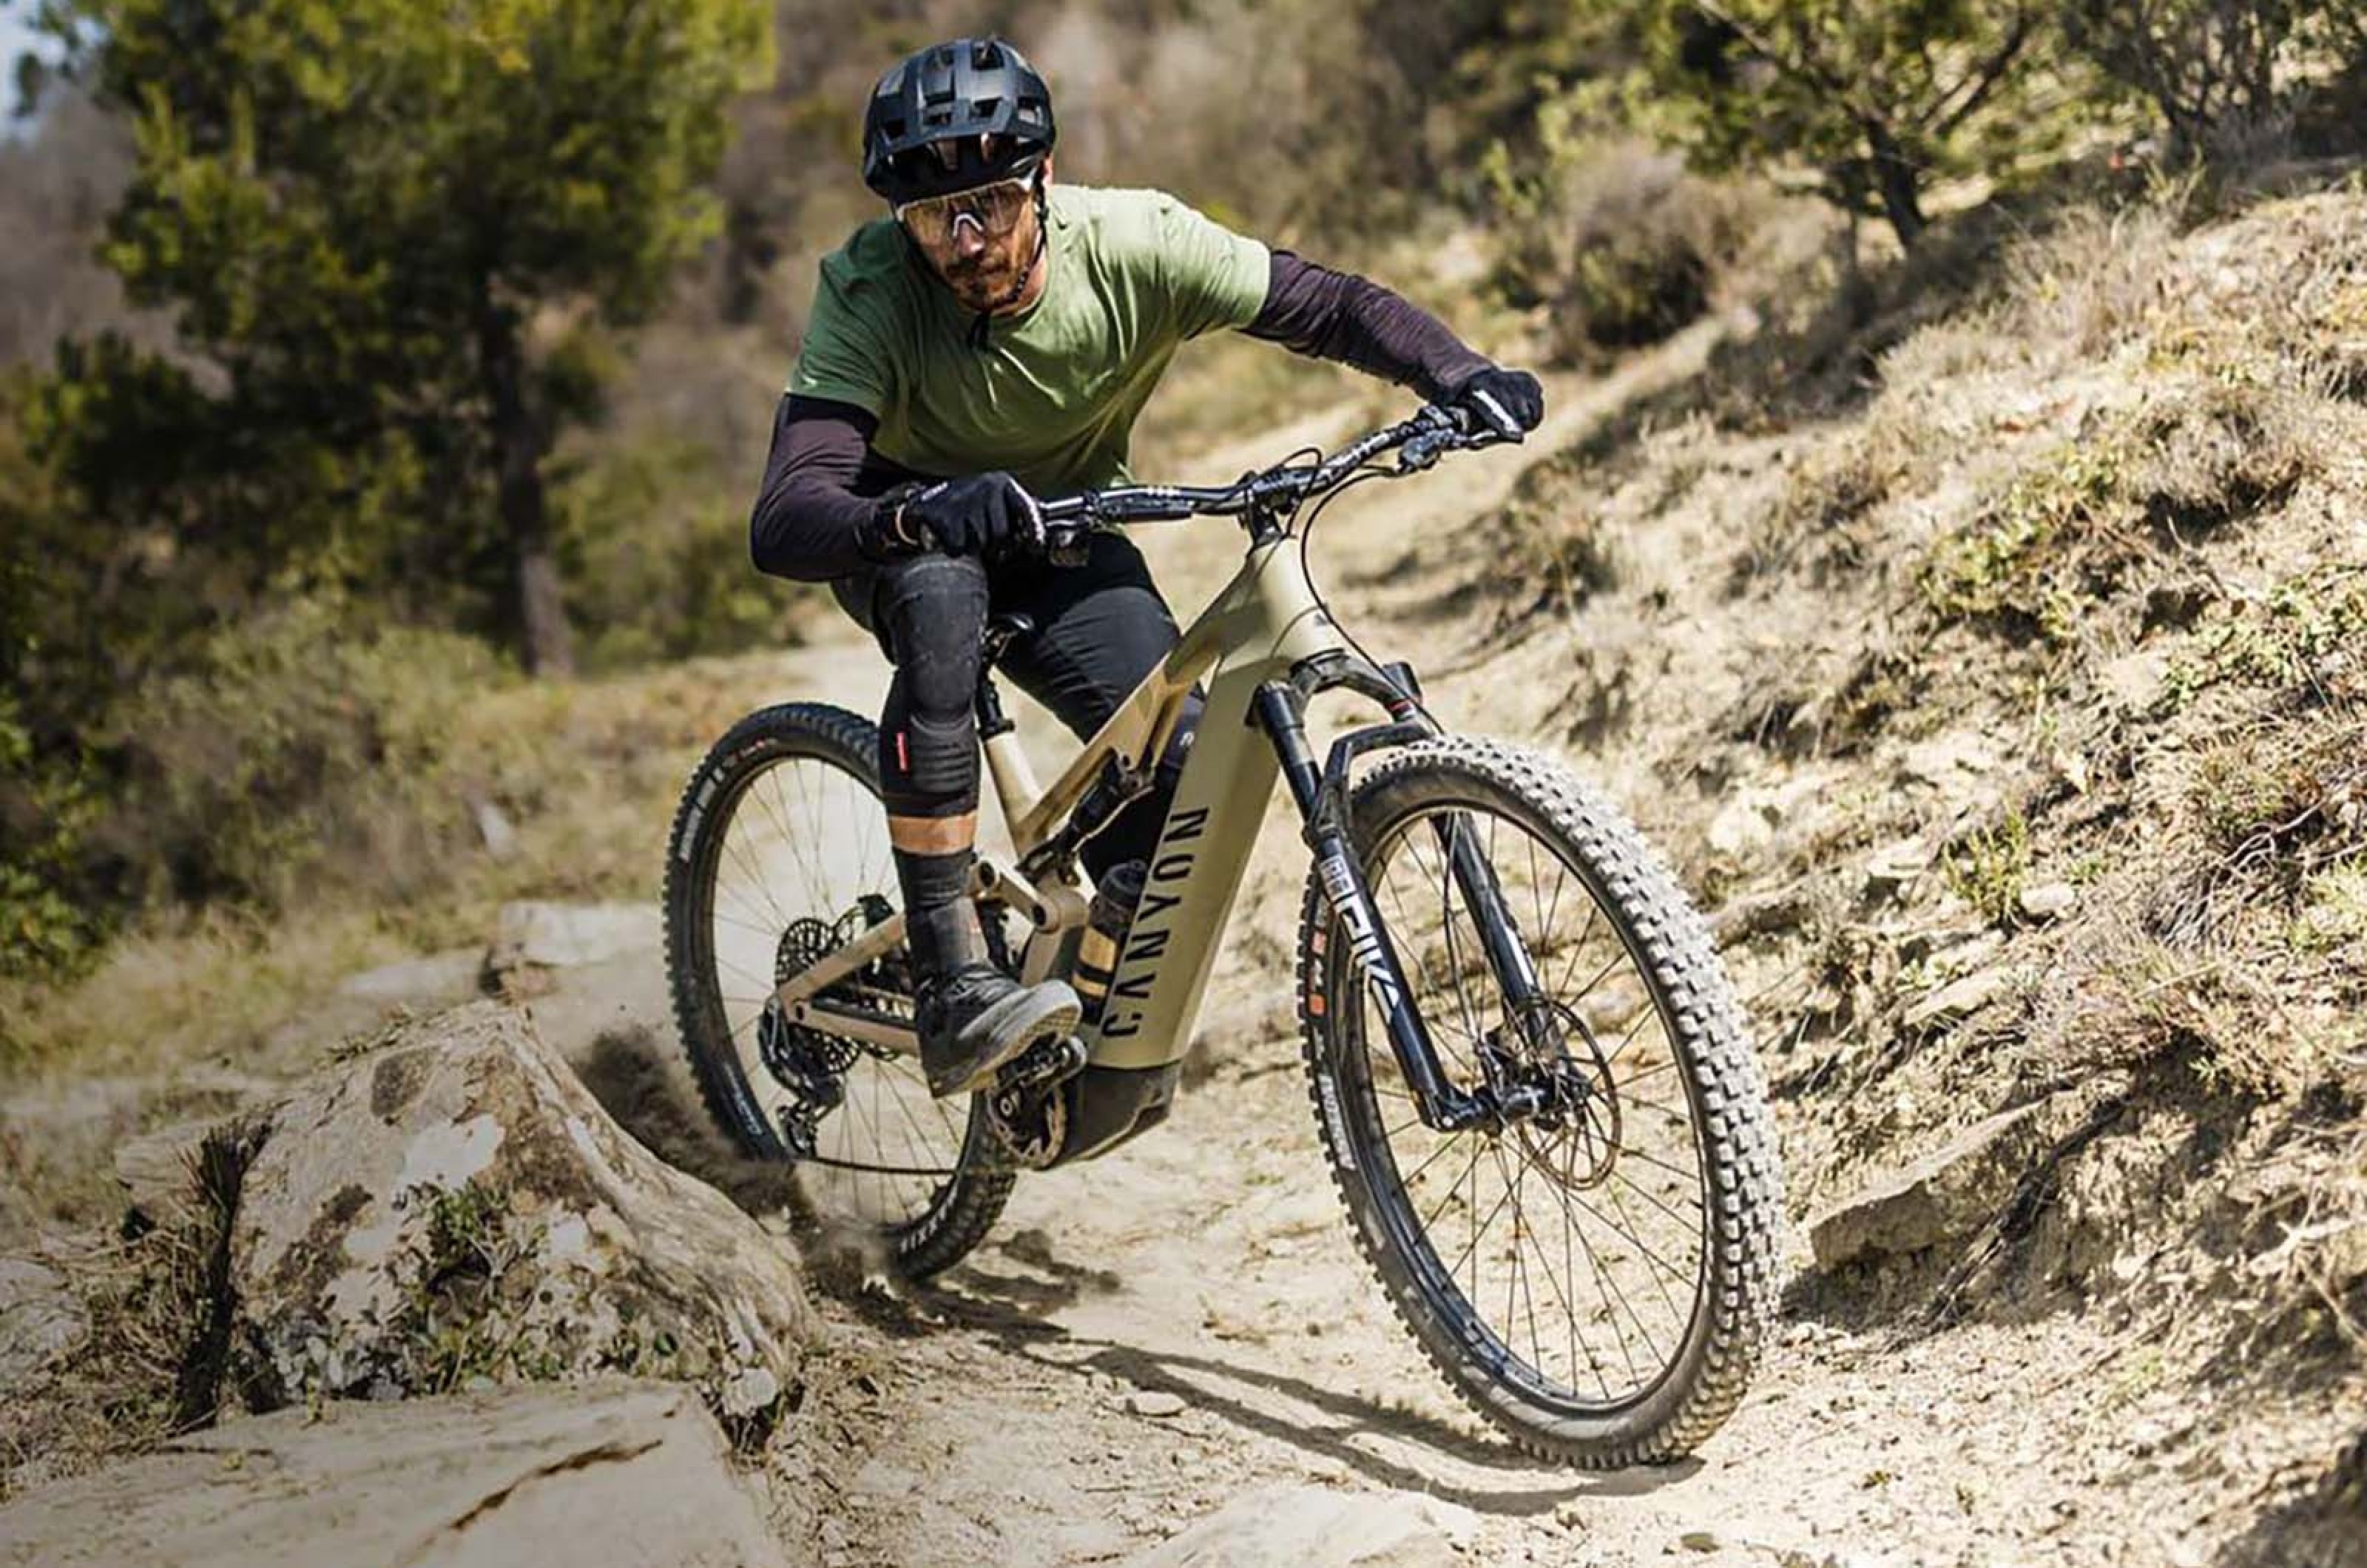 <p>This full-suspension eMTB from Canyon uses the Shimano STEPS EP8 drive system in each model within the range, as well as Canyon’s Triple Phase Suspension design which helps to absorb smaller bumps without compromising on power transfer through the pedals. </p>  <p>The suspension used varies between models, but each bike comes with 130mm travel up front and 130mm on the rear, making it a great e-bike for shredding the local trails or even at the local bike park.</p>